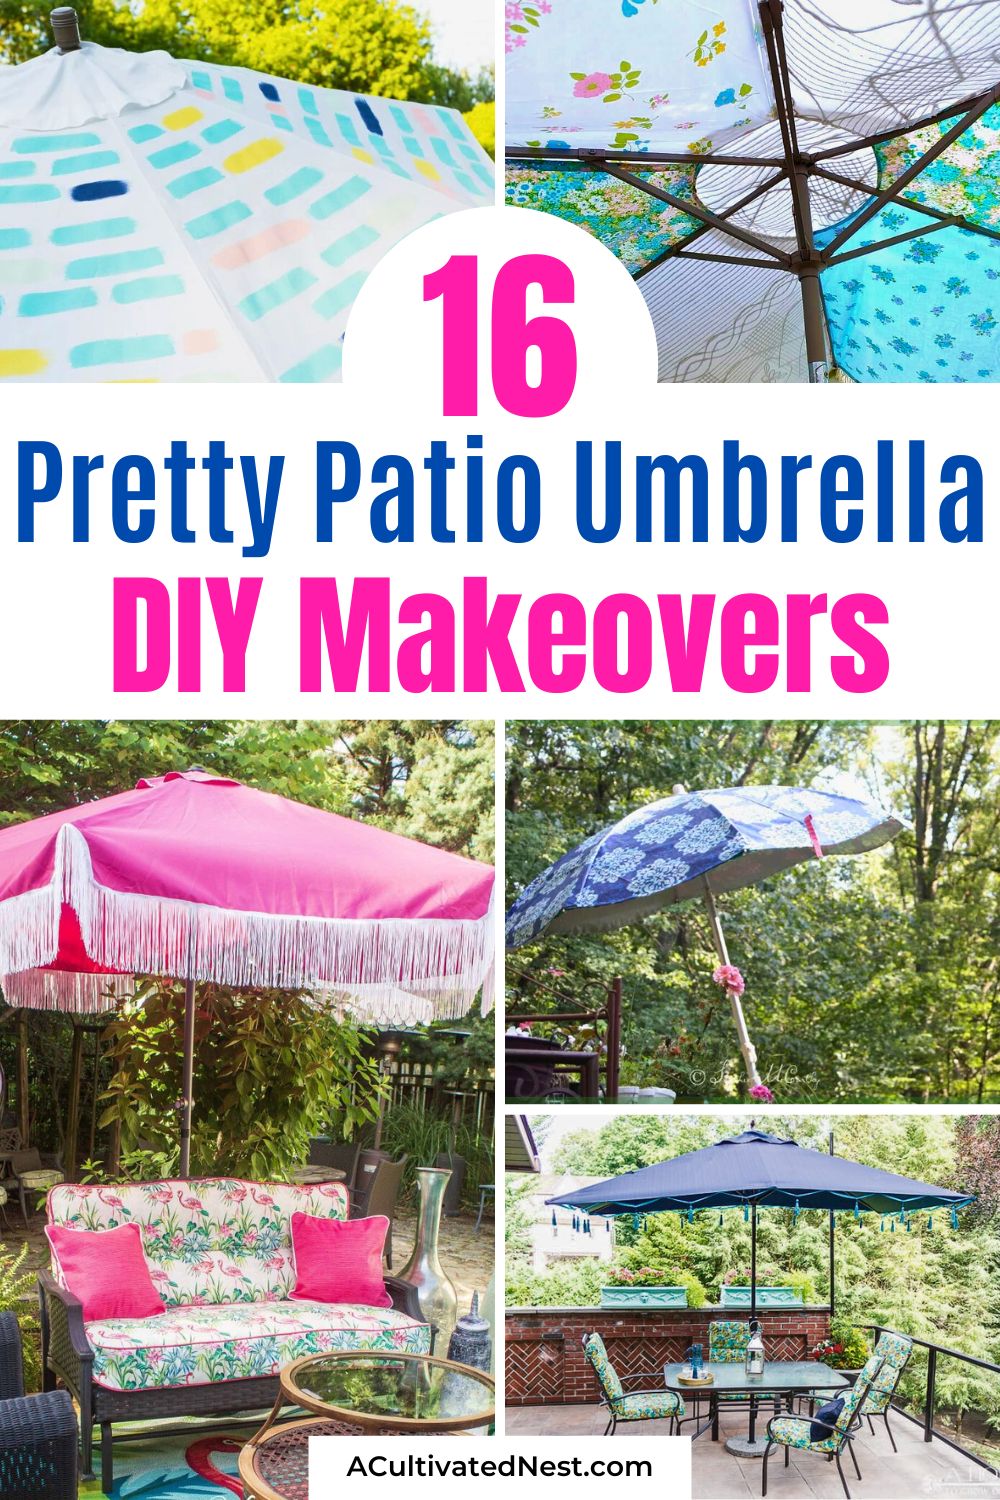 16 Pretty Patio Umbrella DIY Projects- Get inspired with stunning DIY patio umbrella ideas! Whether you're looking for a pop of color or a cozy retreat, these projects are sure to impress. | #PatioMakeover #DIYDecor #OutdoorDesign #SummerVibes #ACultivatedNest